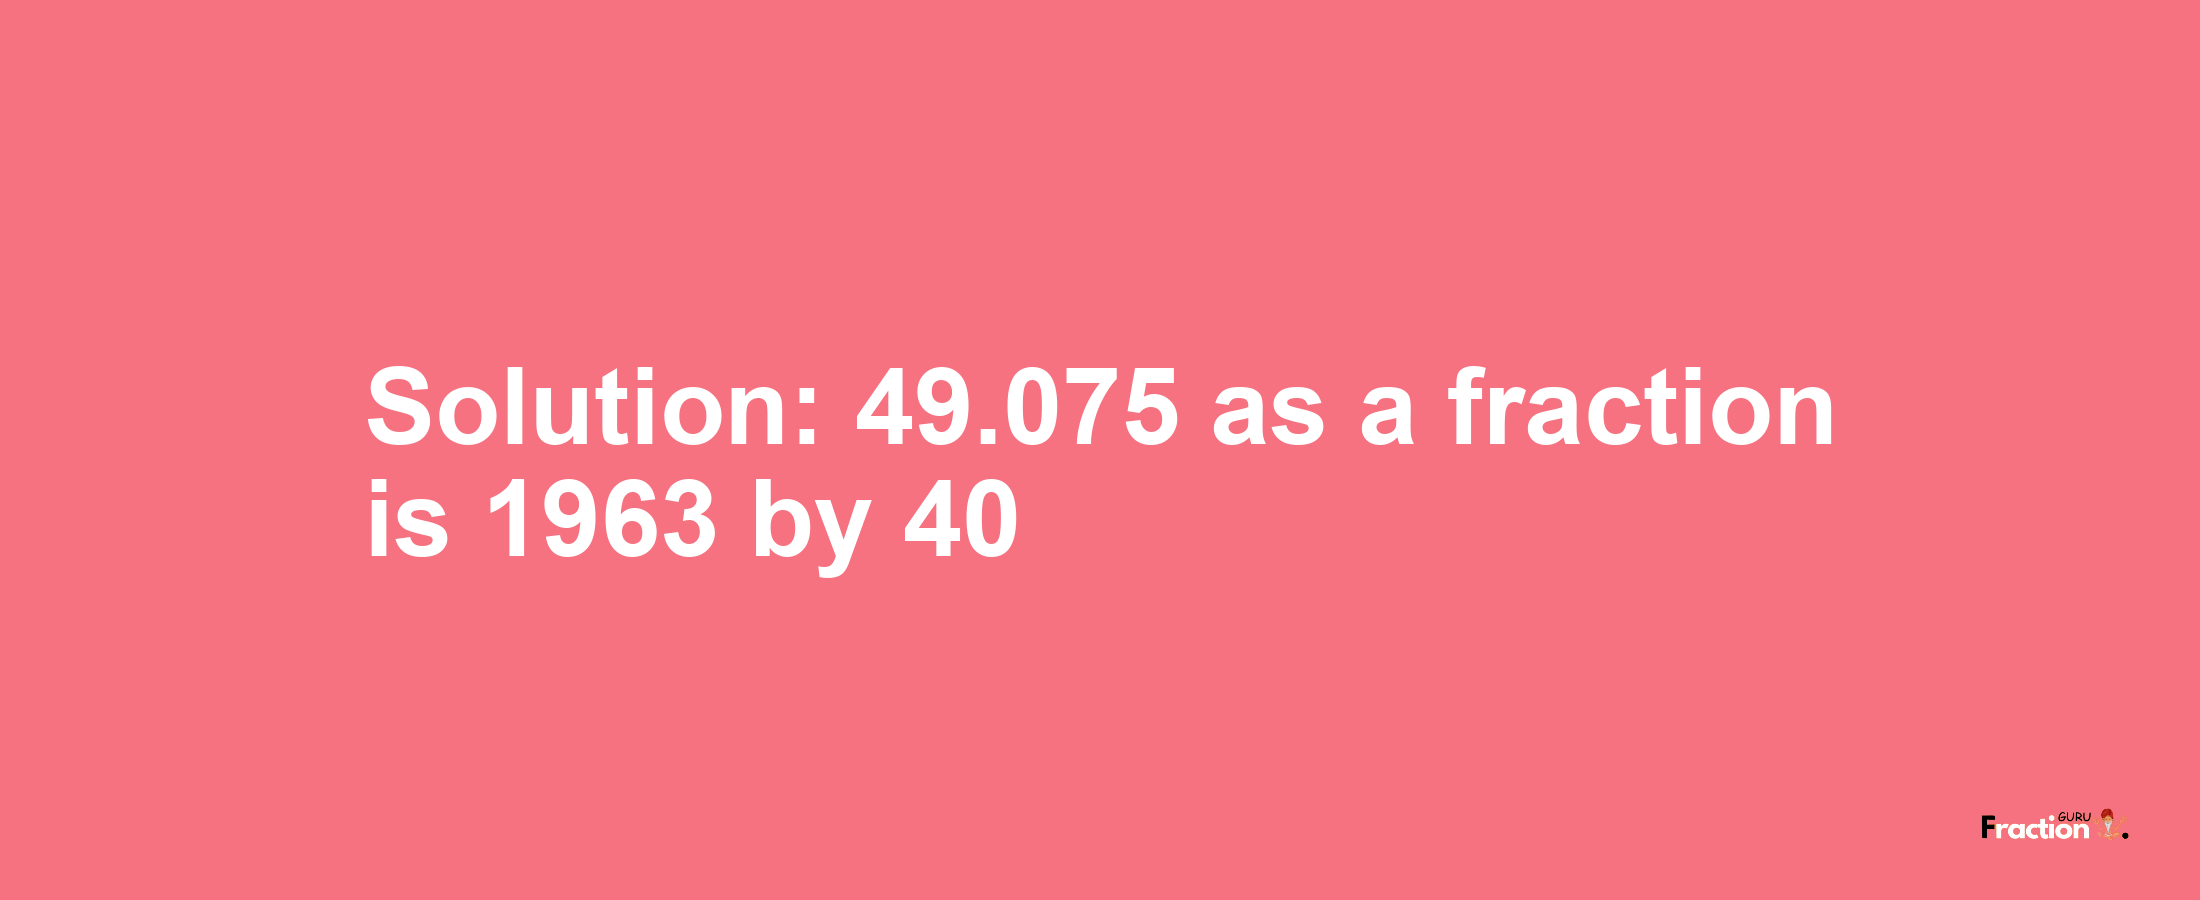 Solution:49.075 as a fraction is 1963/40